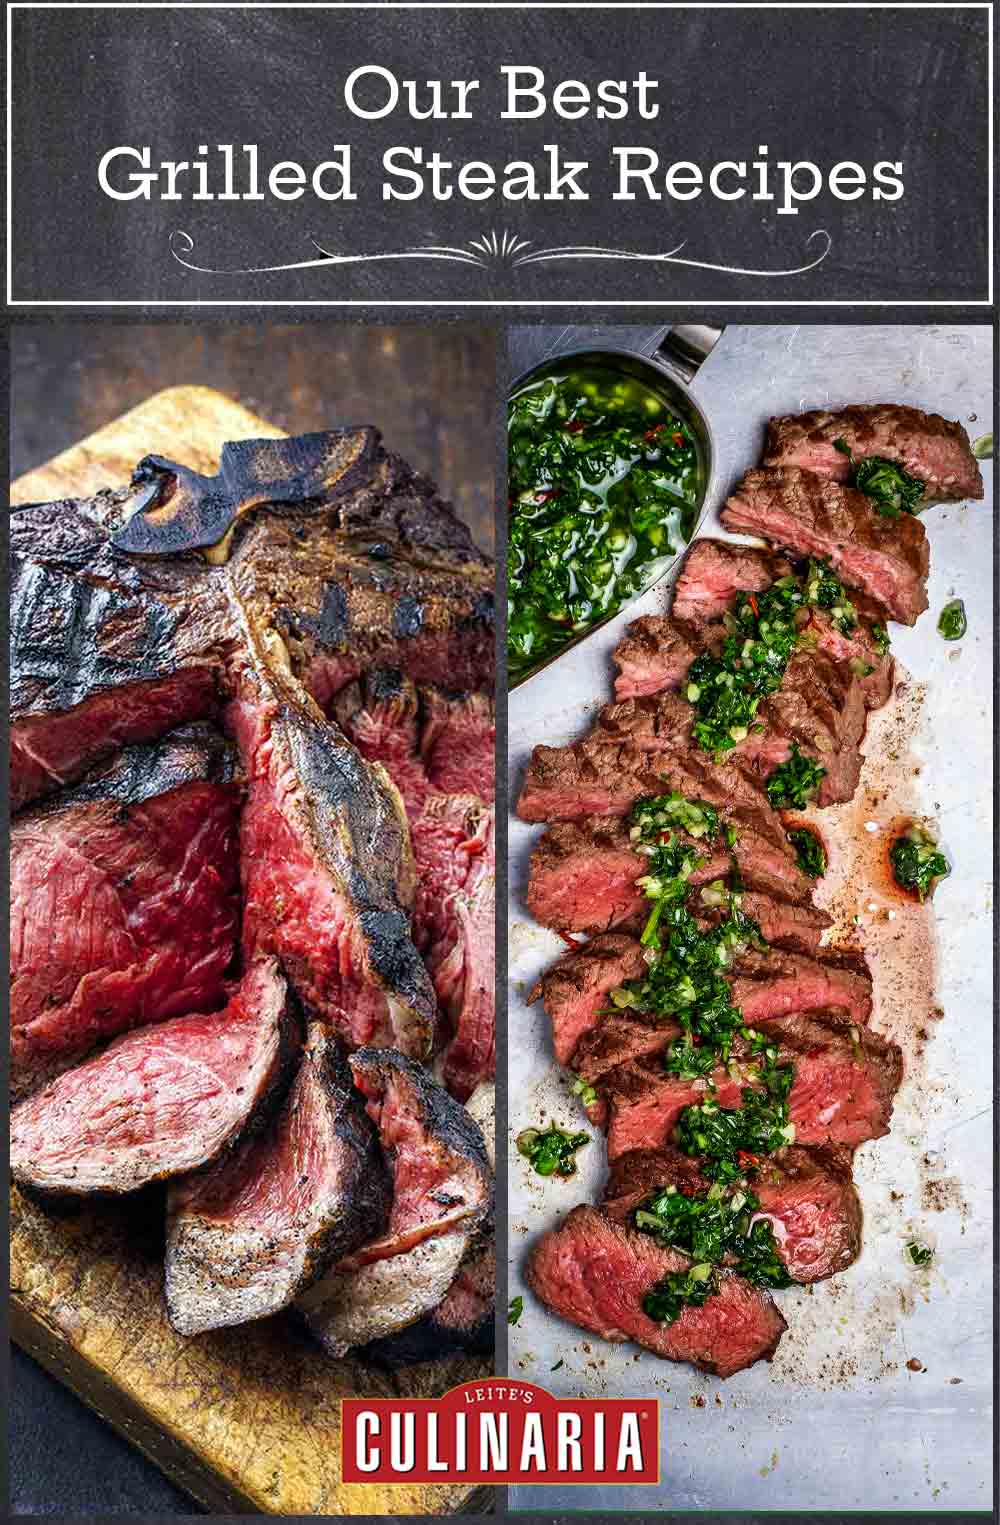 Images of 2 of the 16 grilled steak recipes -- grilled porterhouse steak and steak chimichurri.